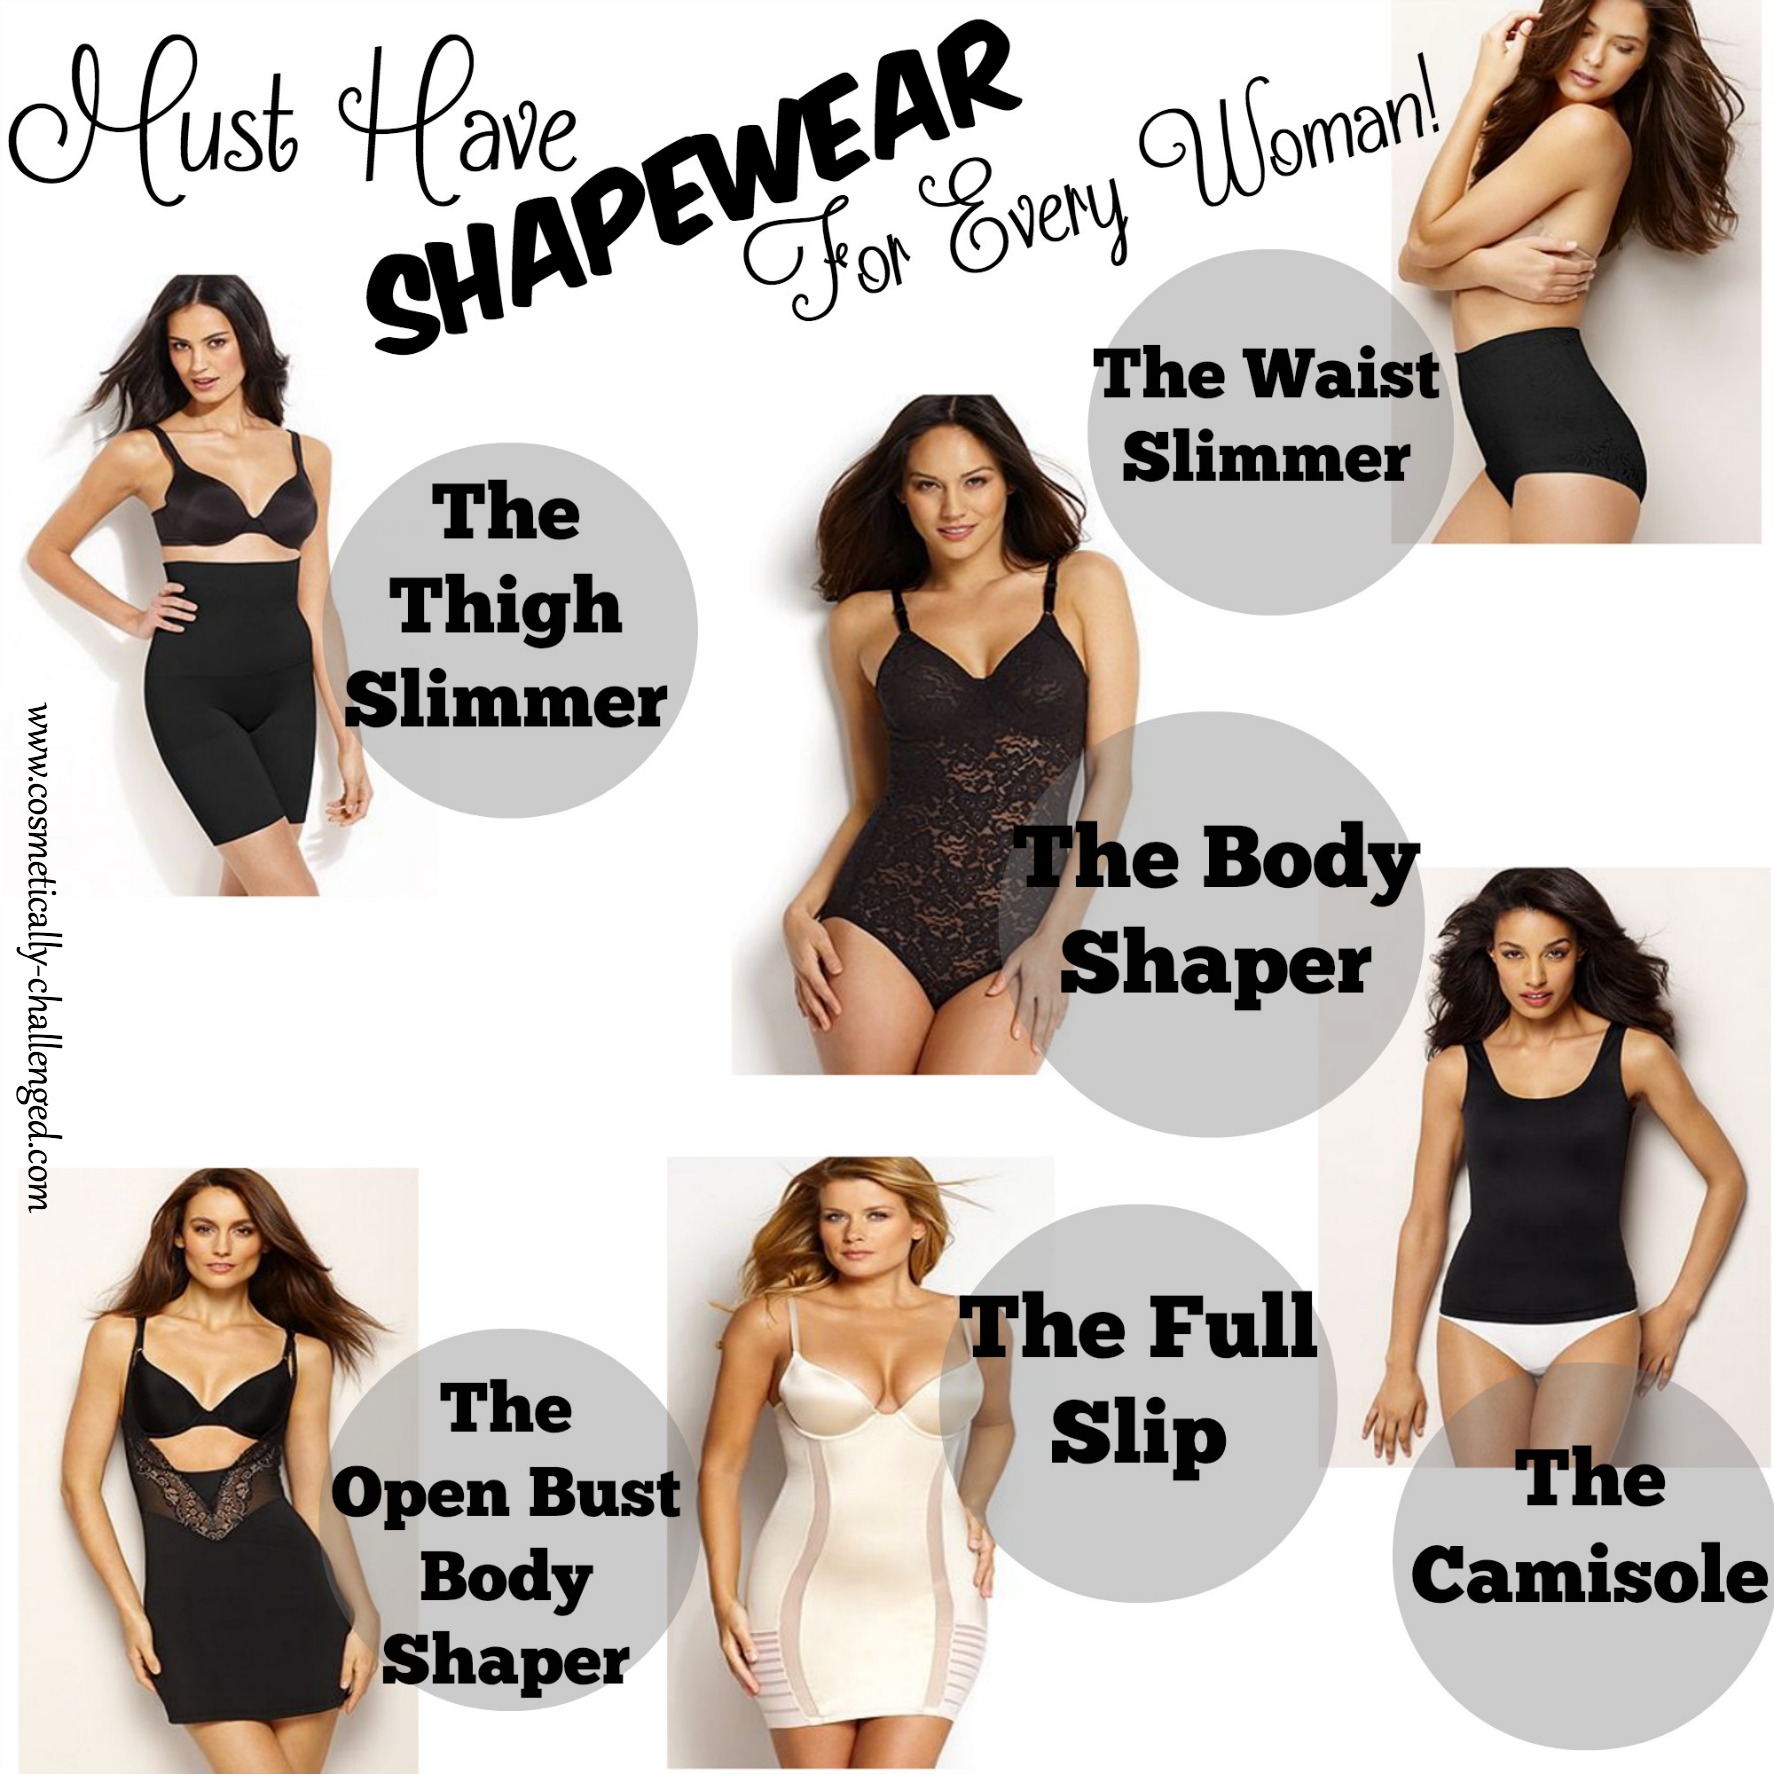 Why I Stopped Wearing Shapewear. Finding peace through body